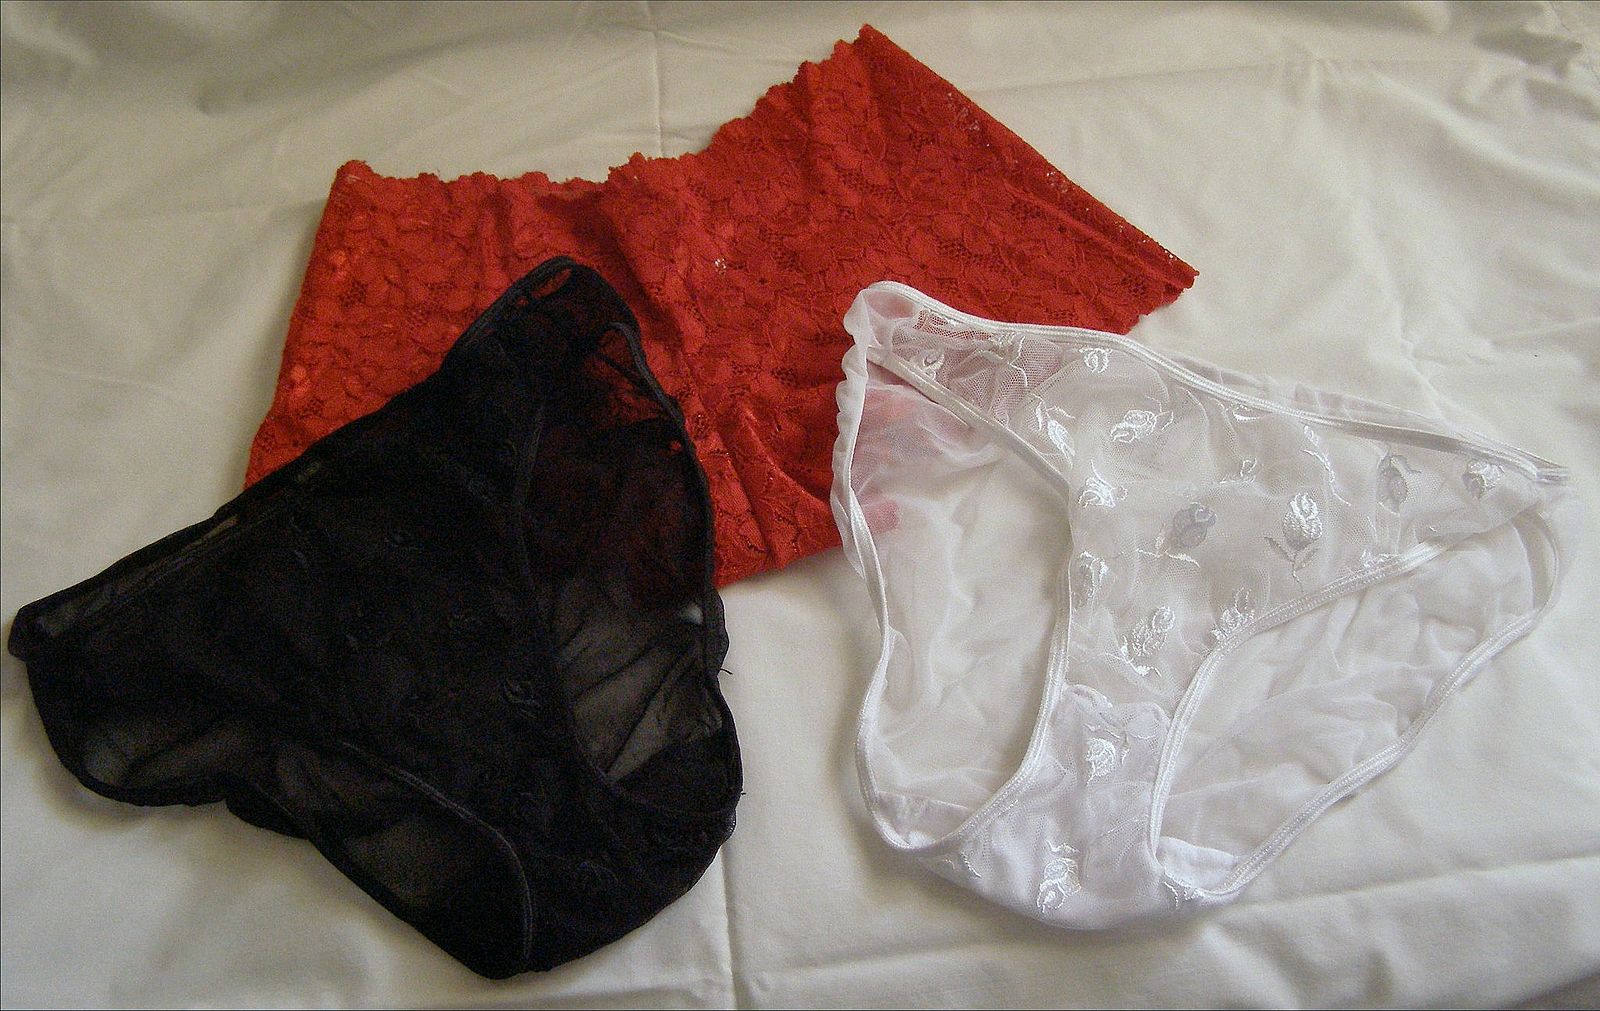 Has anyone (males) worn women's panties simply because they are